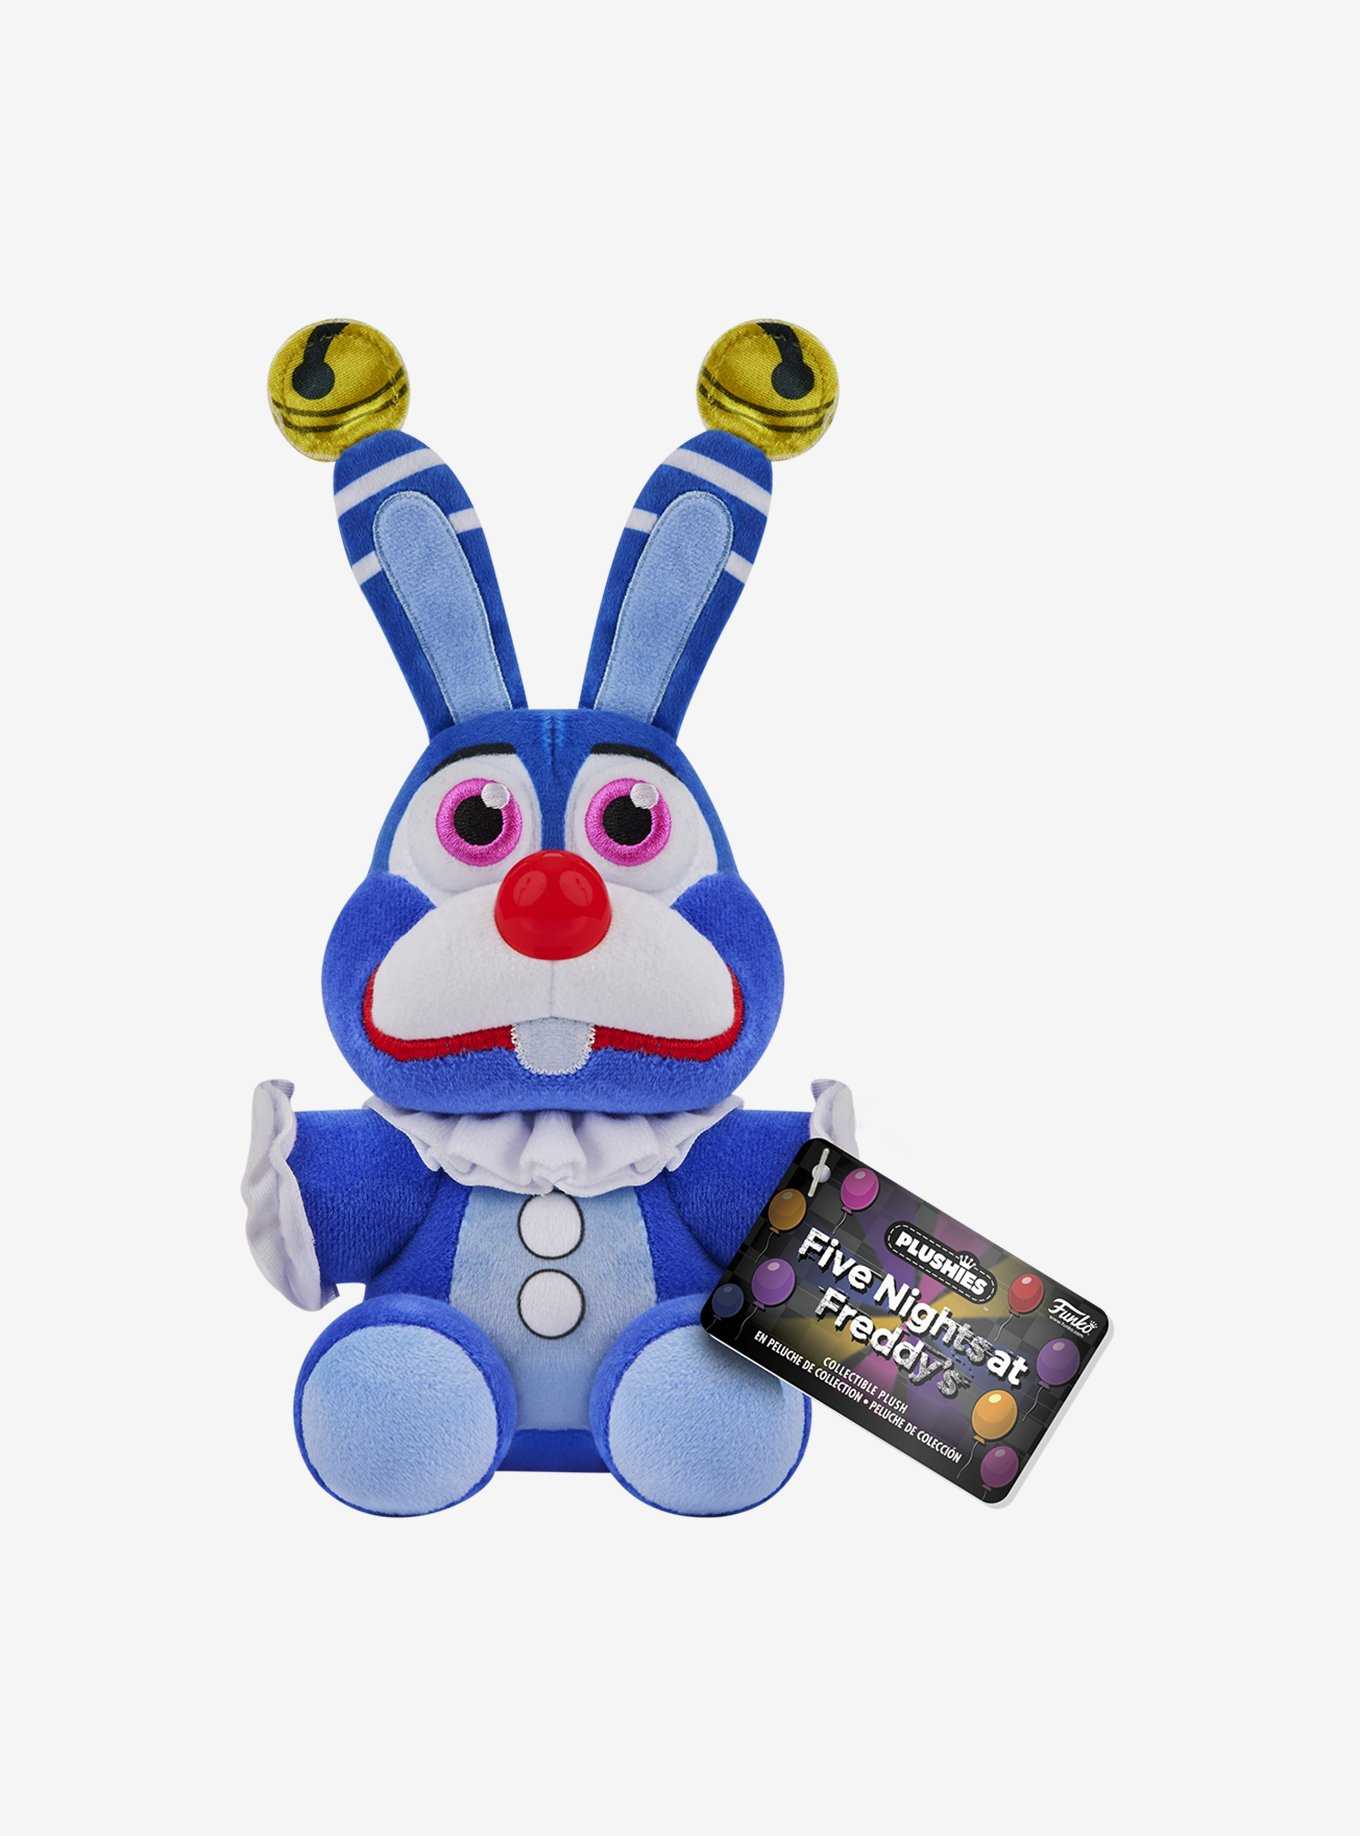 FazBearCollects on X: 🐻🍕NEW FNAF MERCH AT THE HOTTOPIC WEBSITE INLCUDING  A BEANIE, NECKLACES, BRACLETS AND EARRINGS!!!🍕🐻 #hottopic #fnaf  #securitybreach #fivenightsatfreddys #scottcawthon #fnafnews #fnafmerch   / X